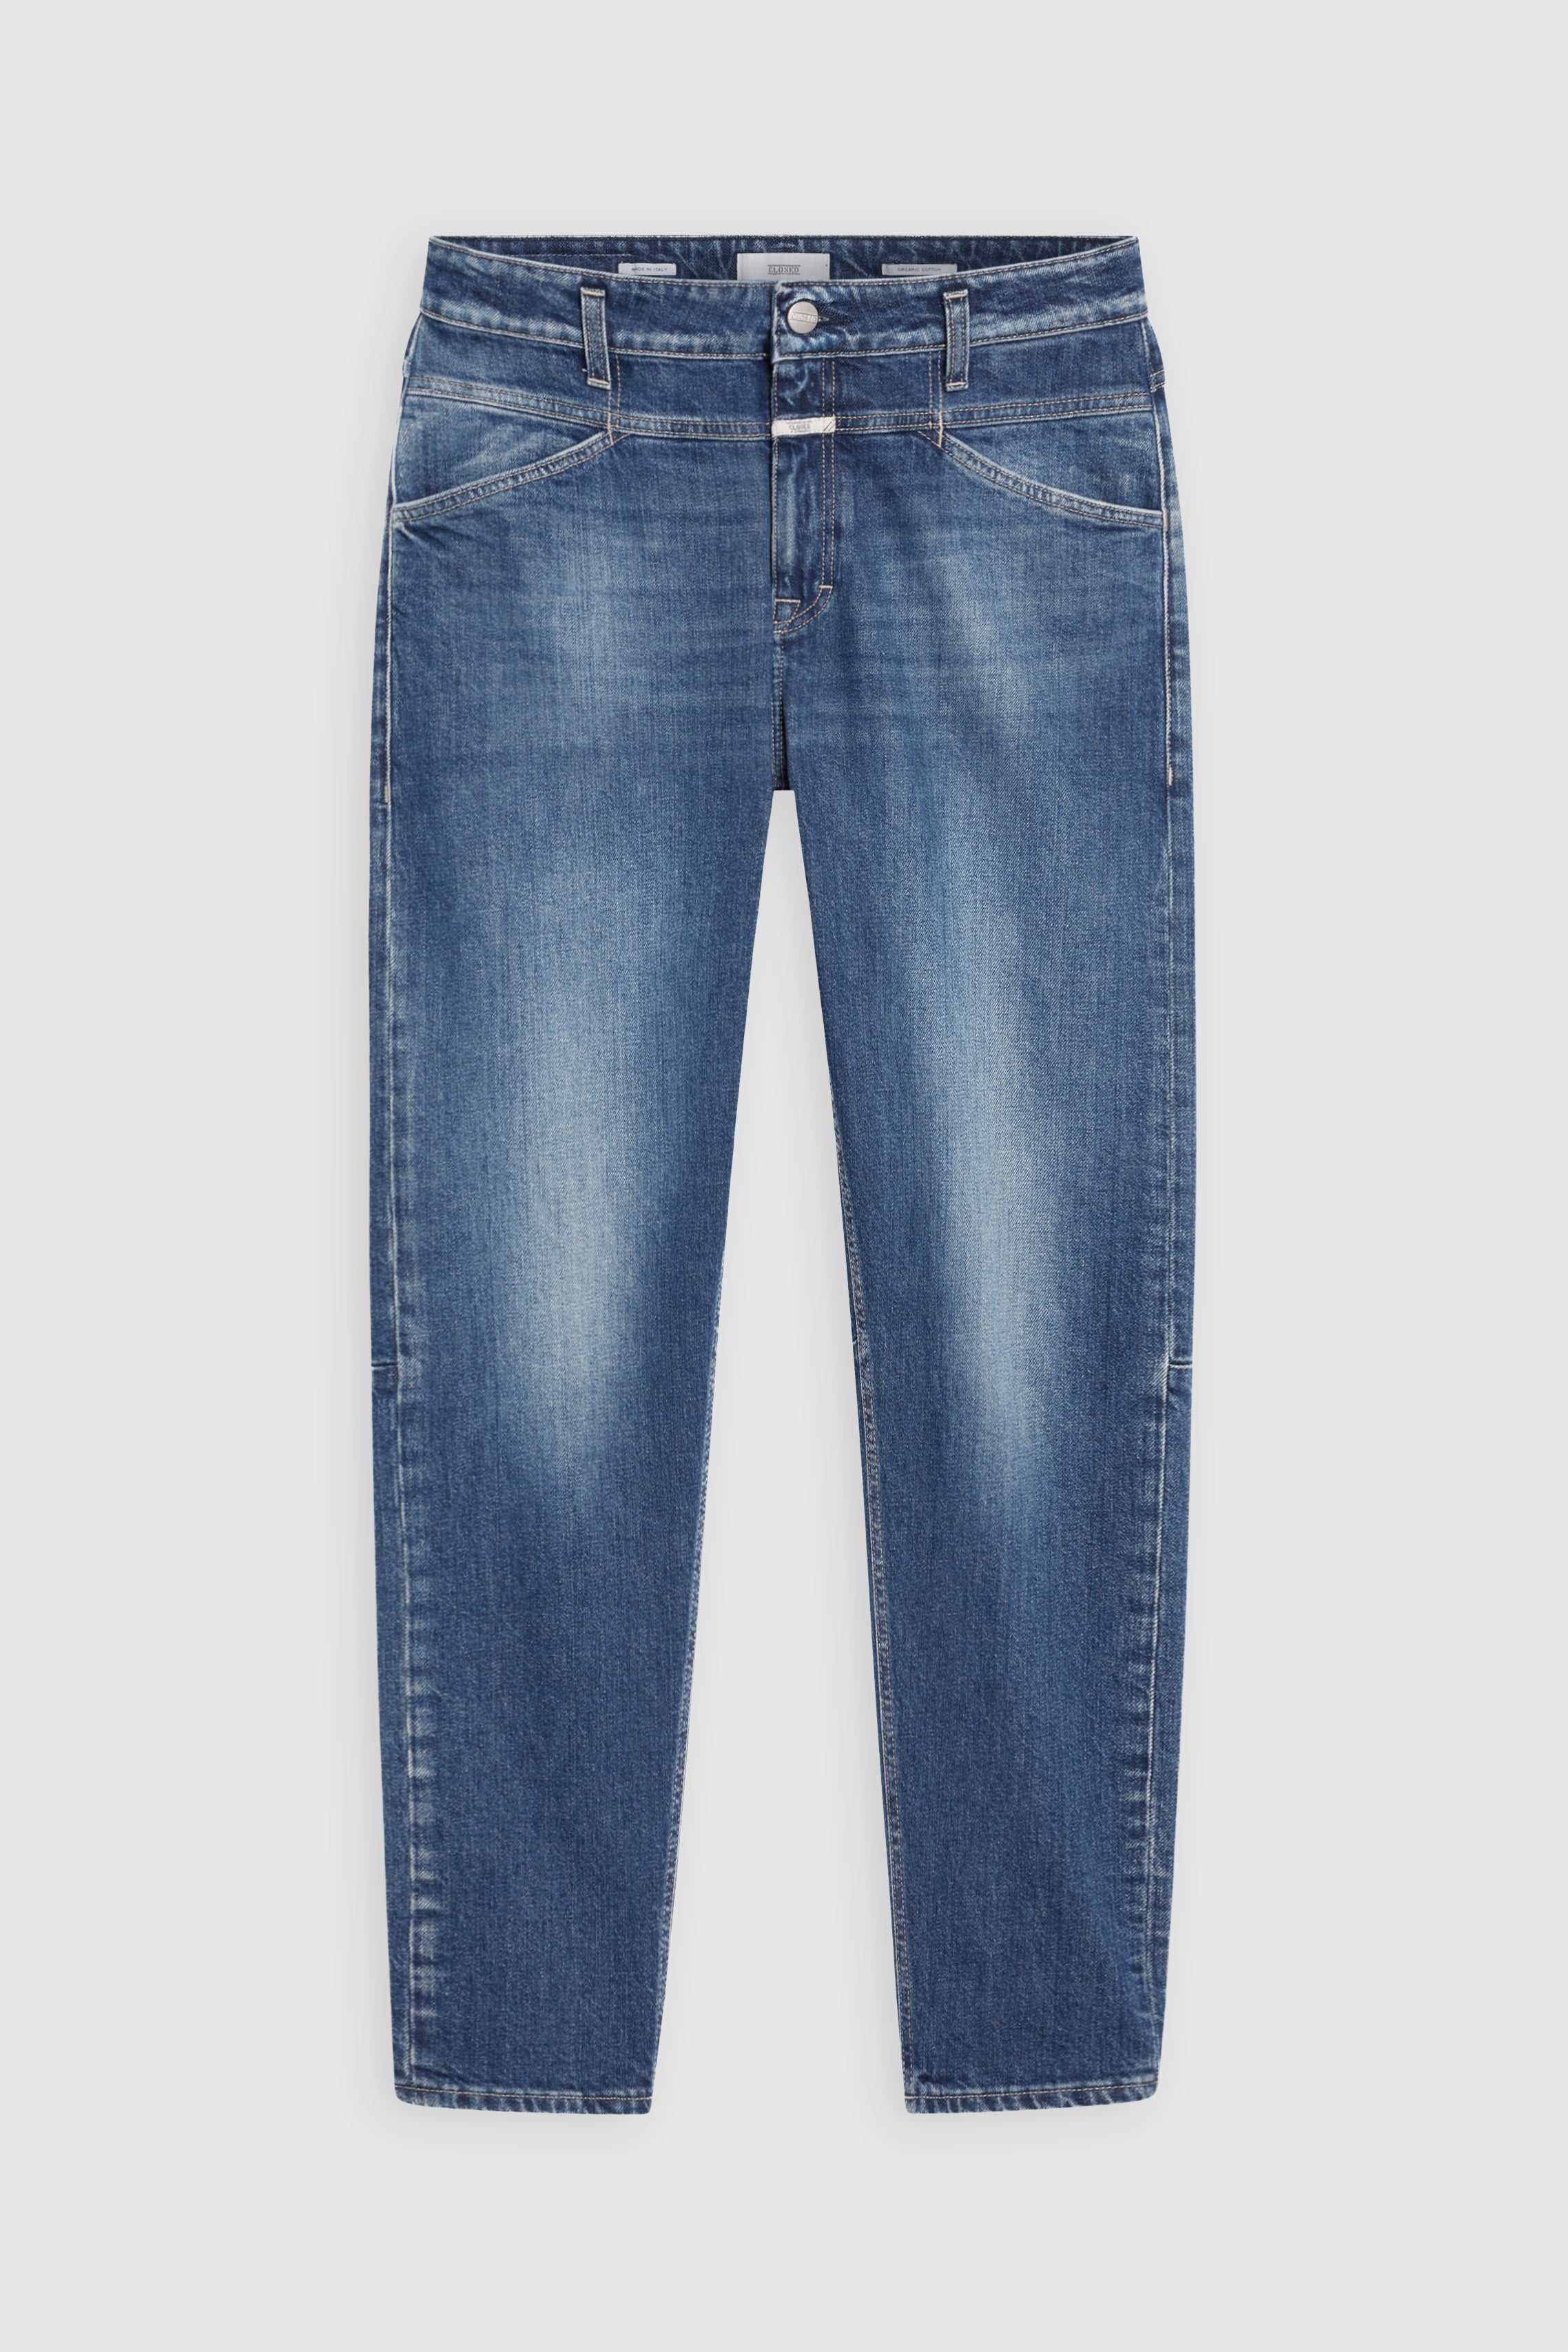 STYLE NAME X-LENT JEANS